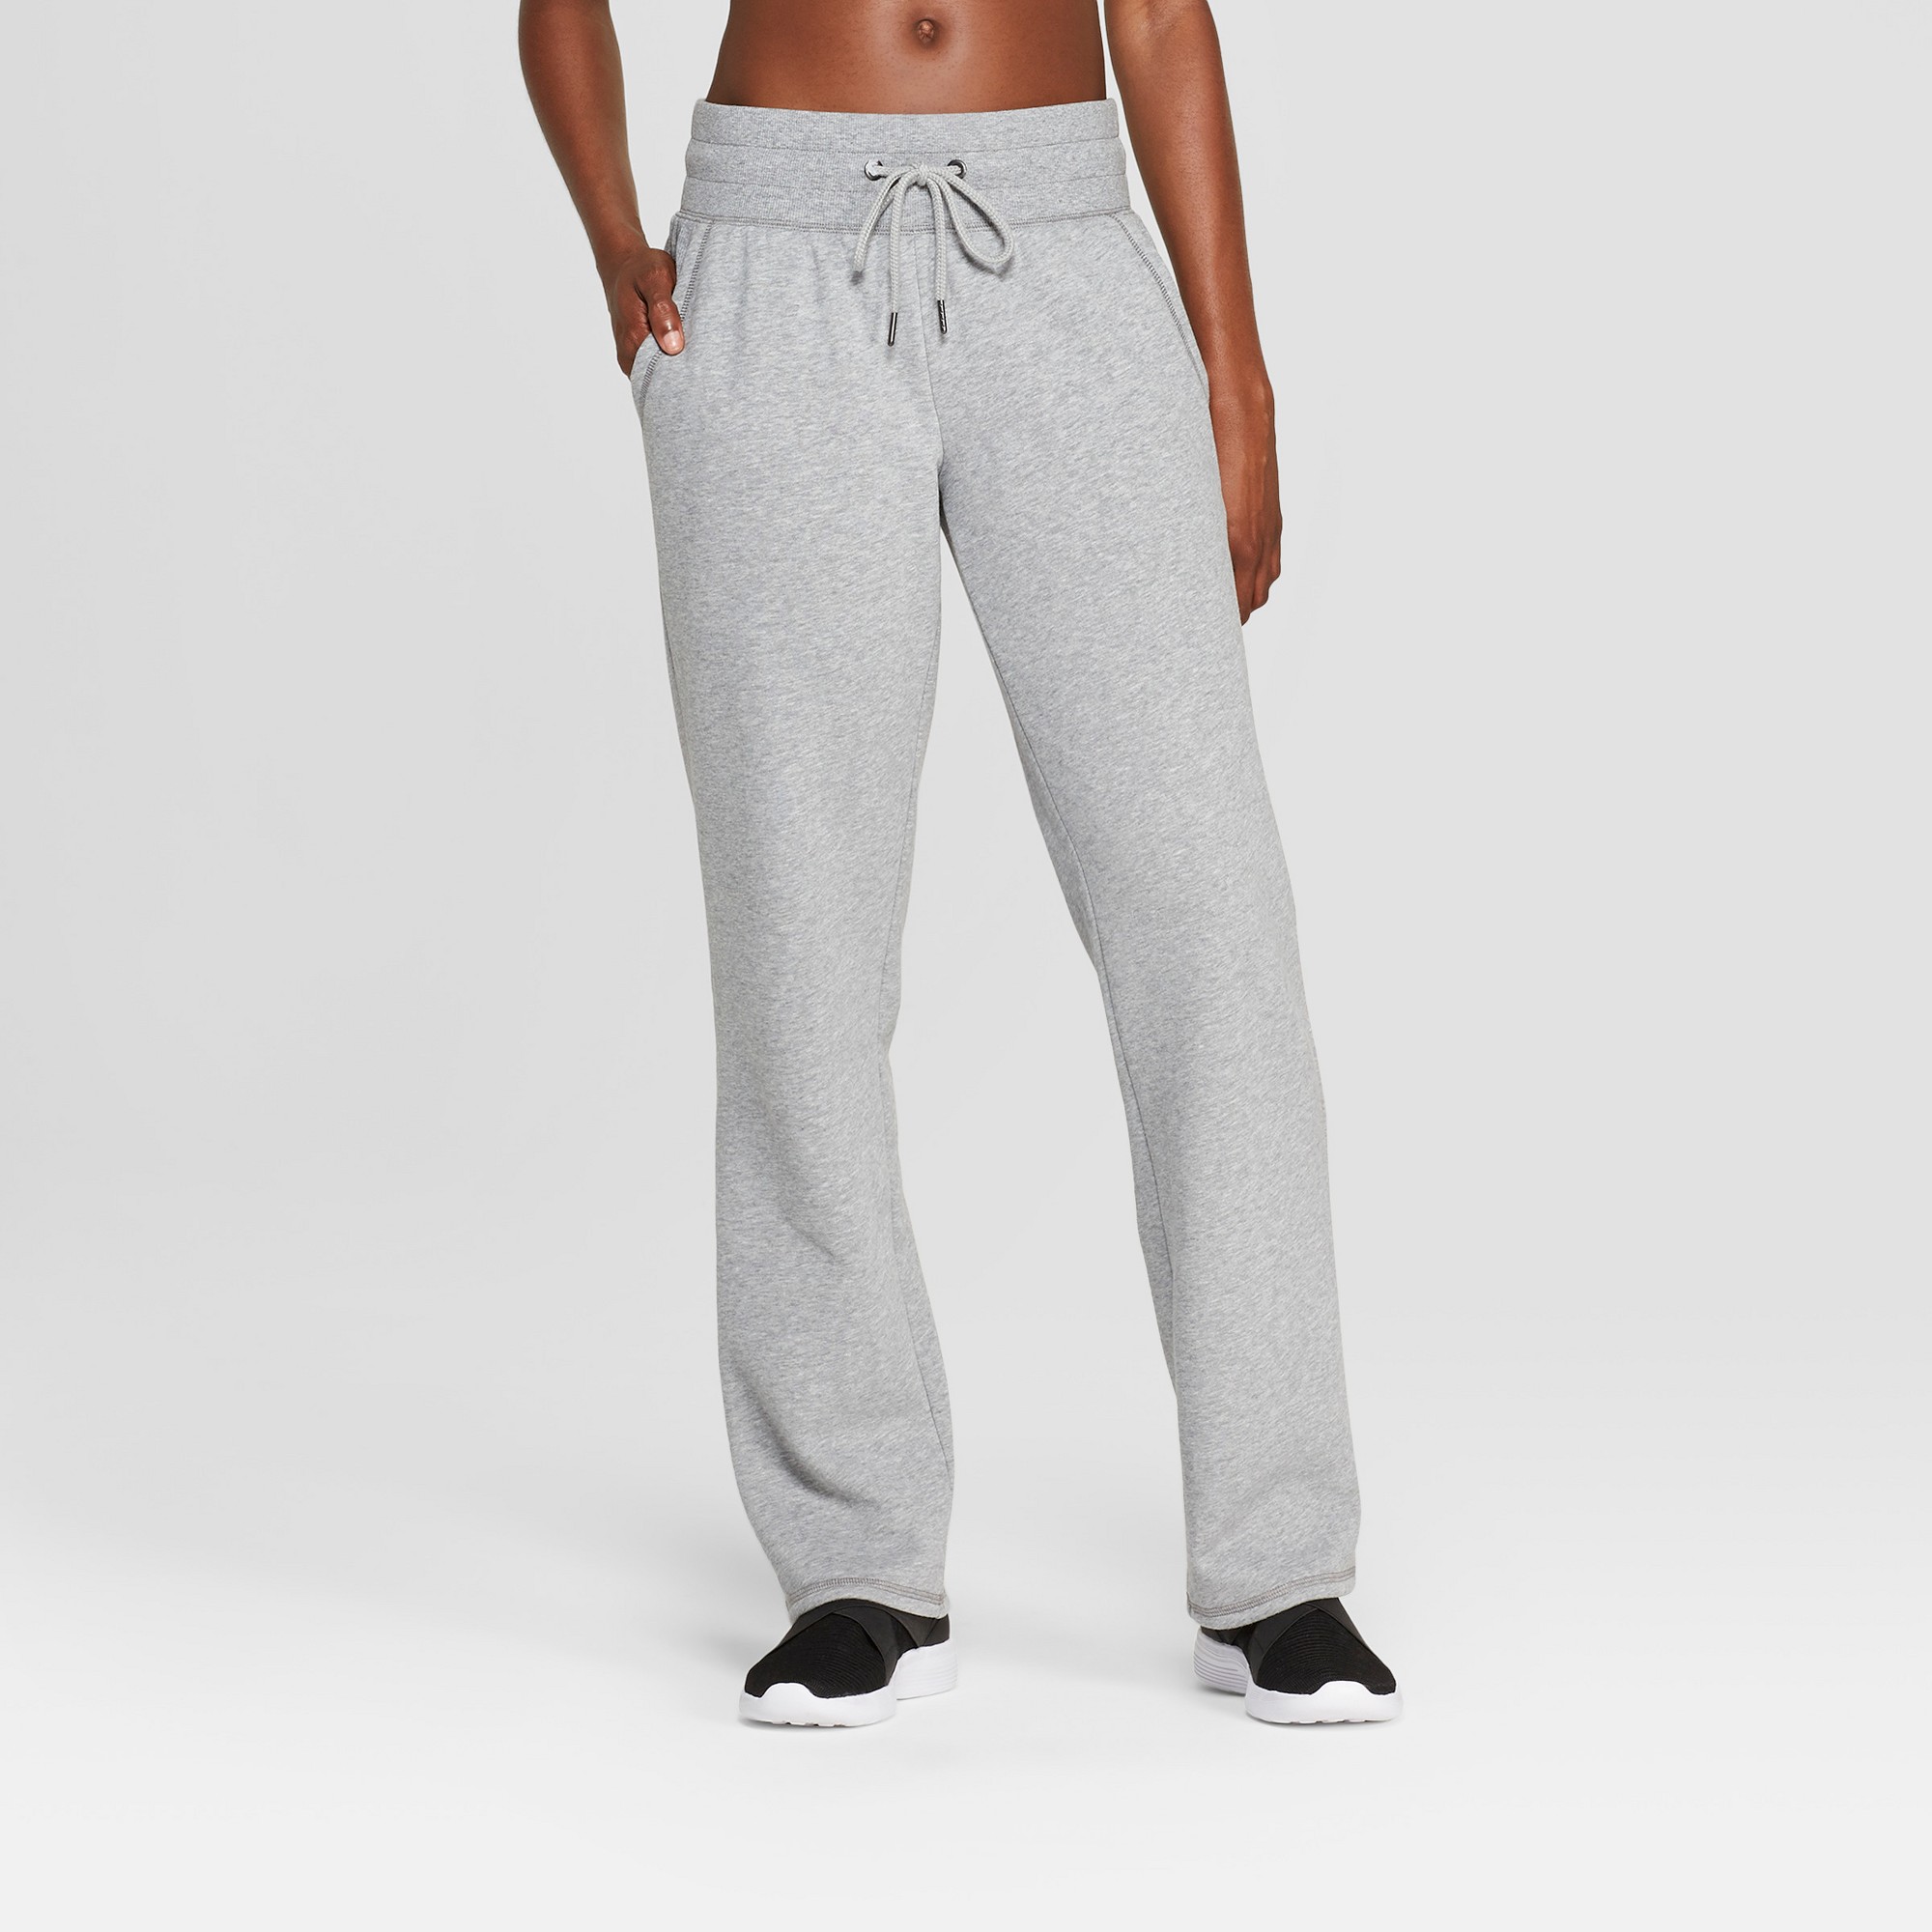 Women's Mid-Rise Straight Authentic Fleece Sweatpants - C9 Champion Heather  Gray L, Size: Large, Grey Gray, by C9 Champion